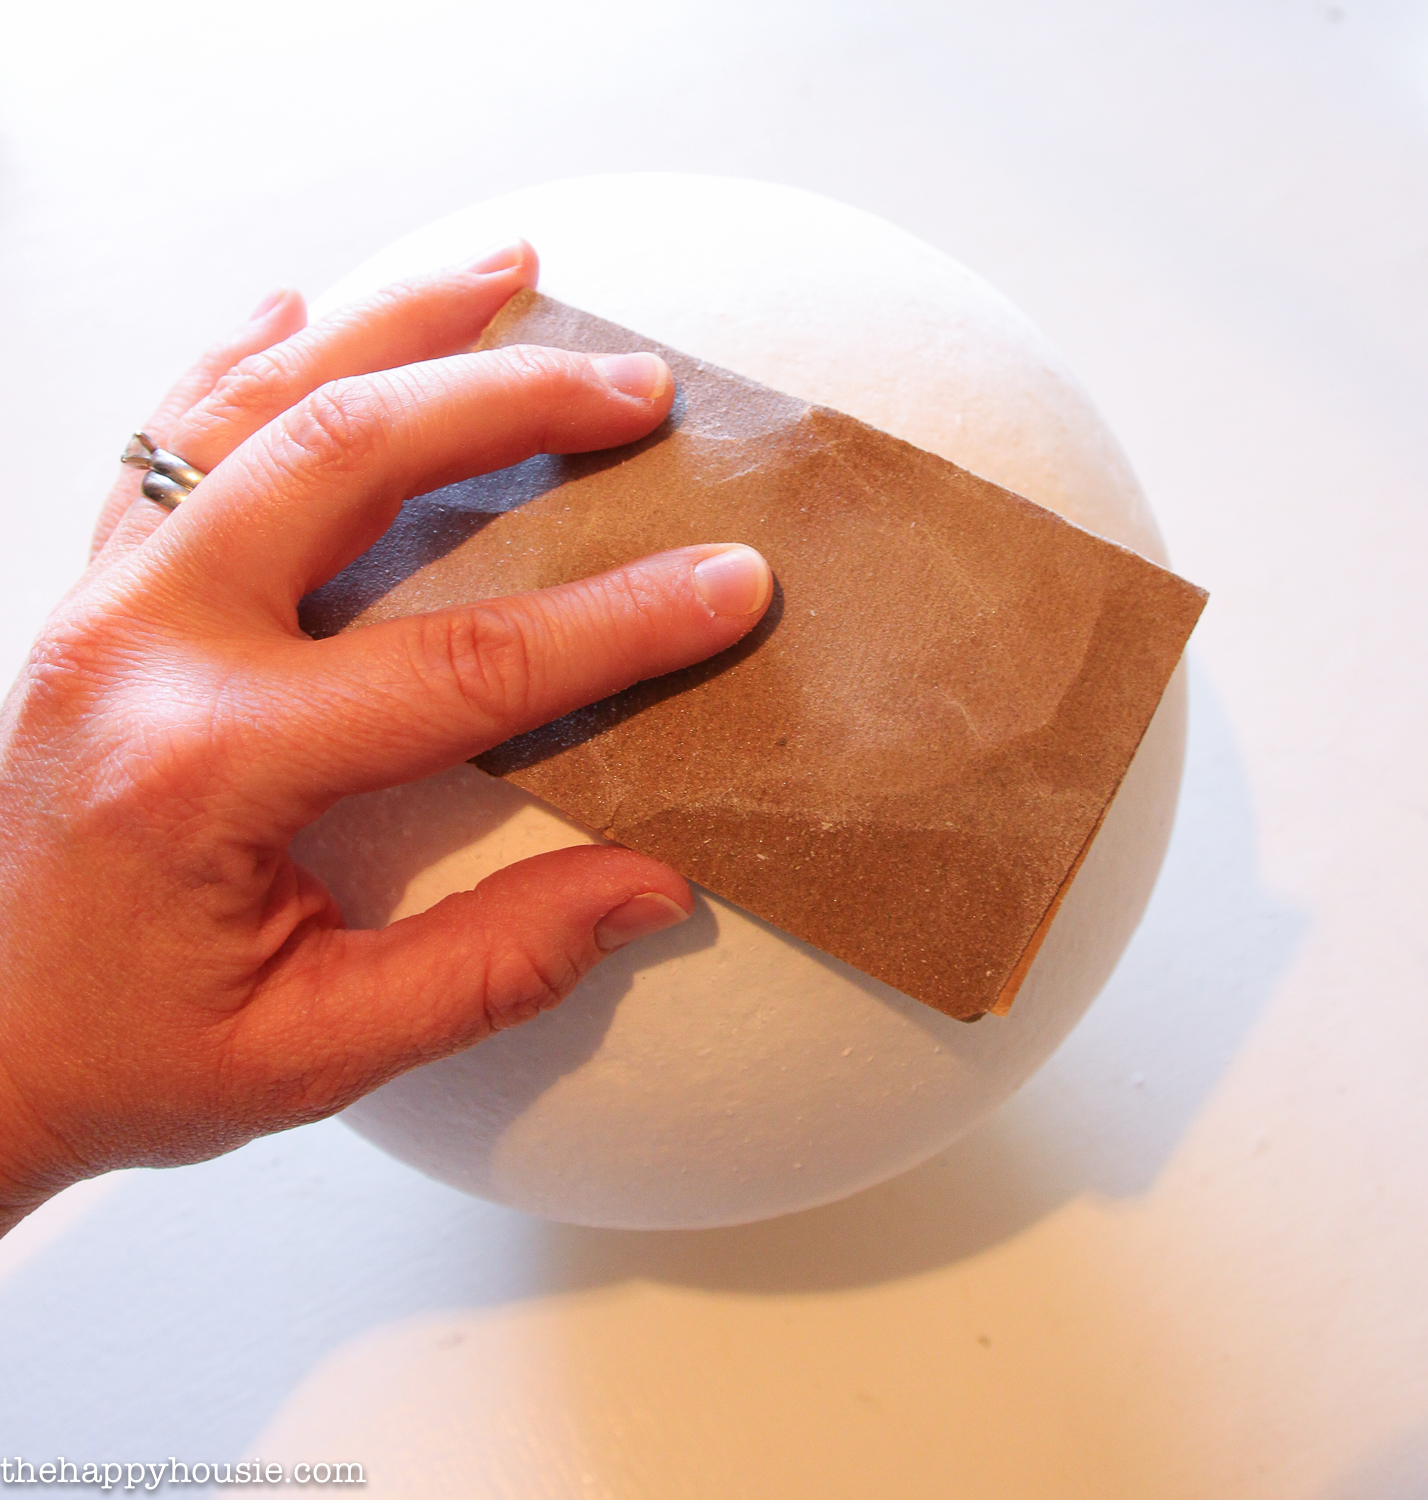 Using sandpaper to smooth the sphere.